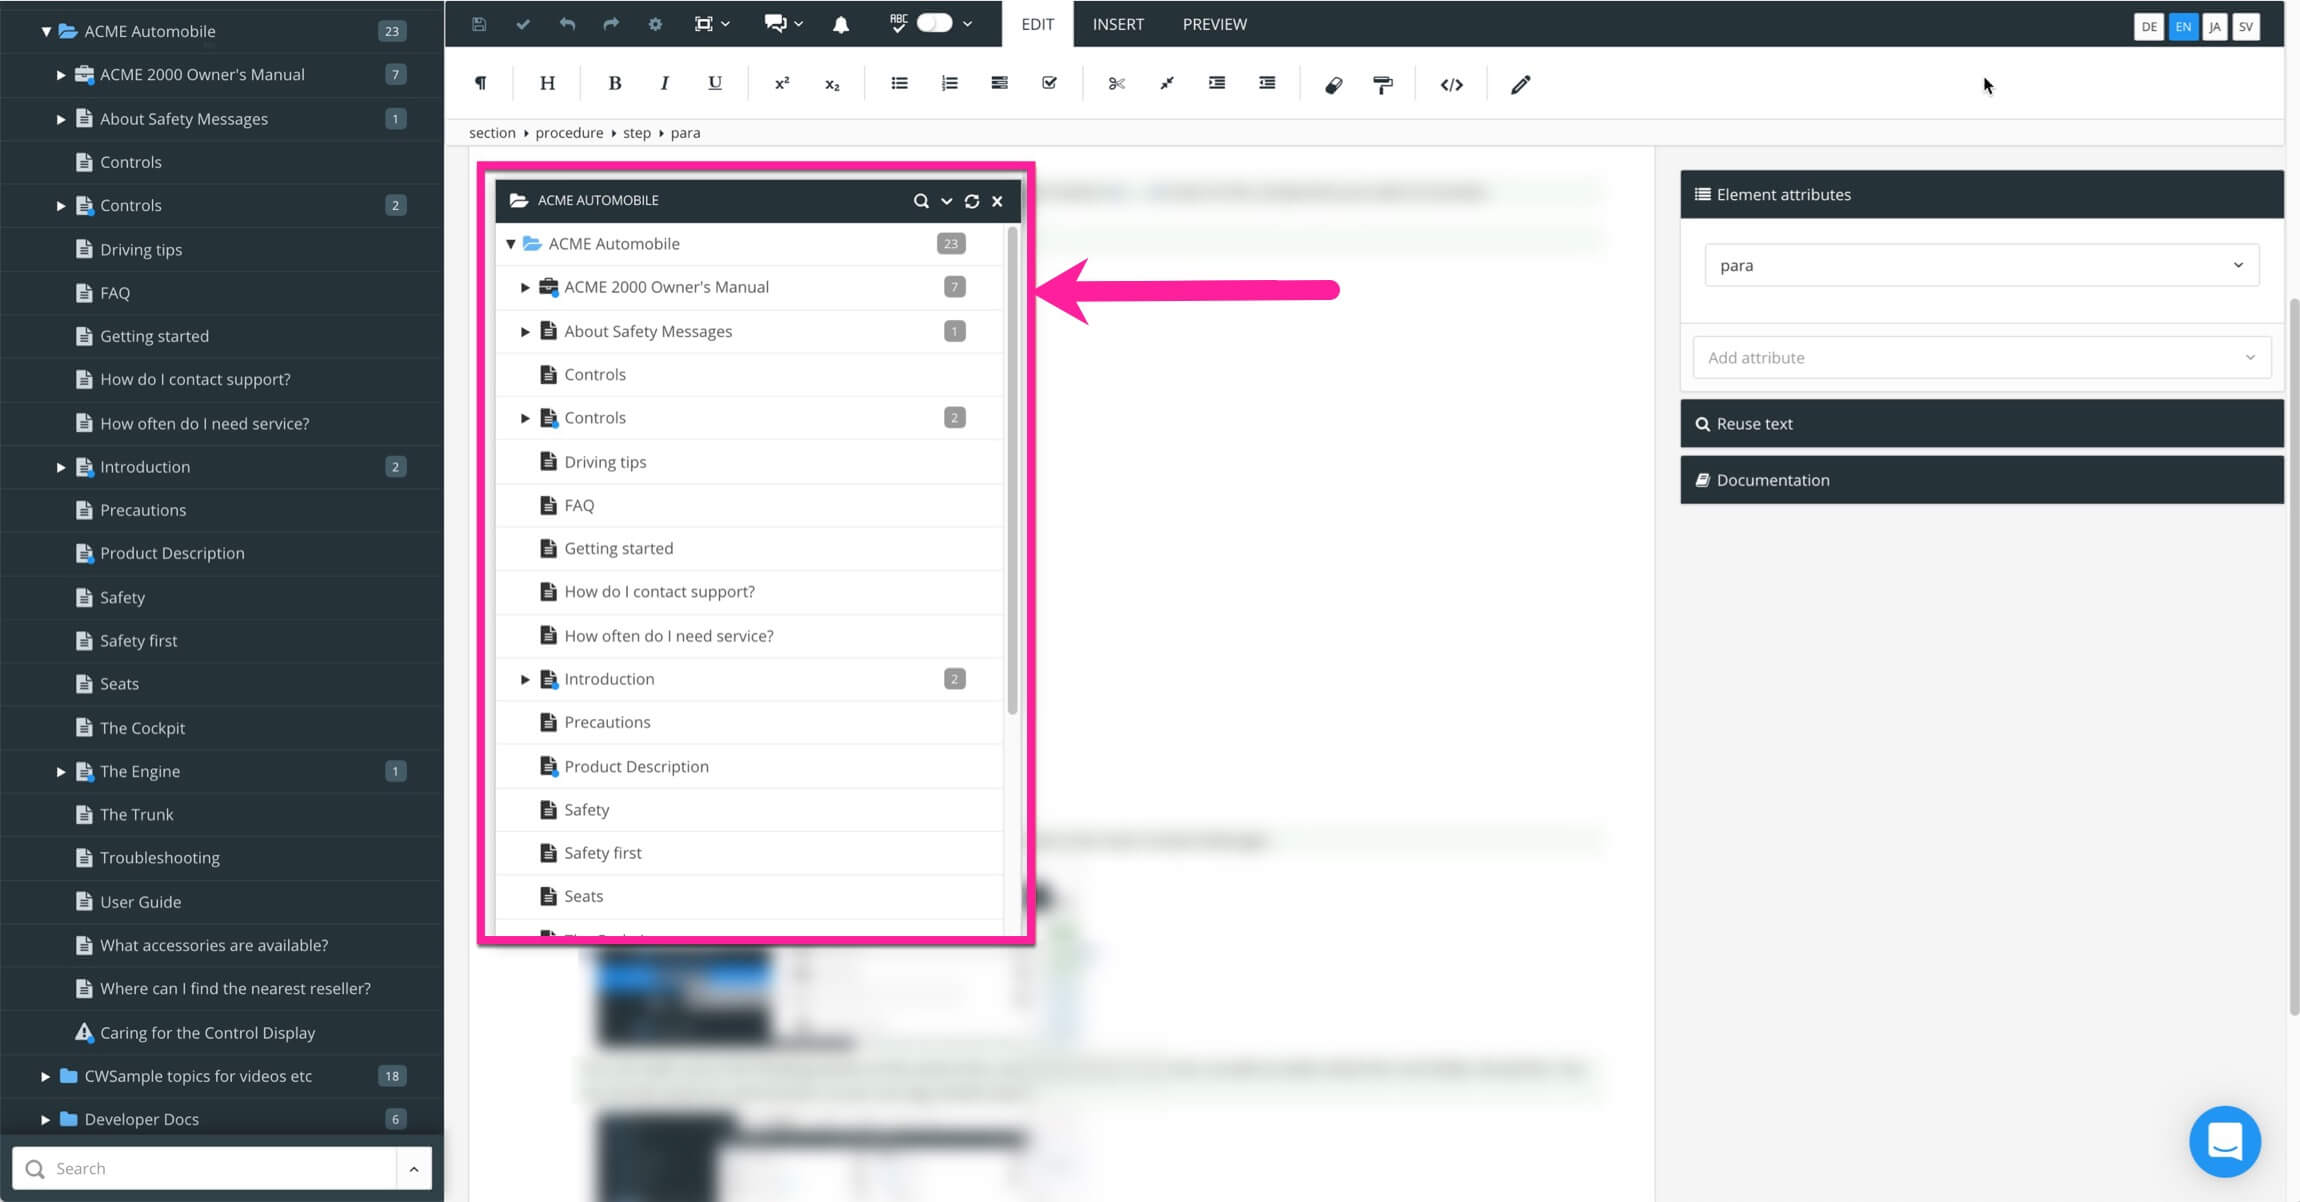 Floating content panel shows a folder and its contents in a separate panel that overlays the main editor UI.